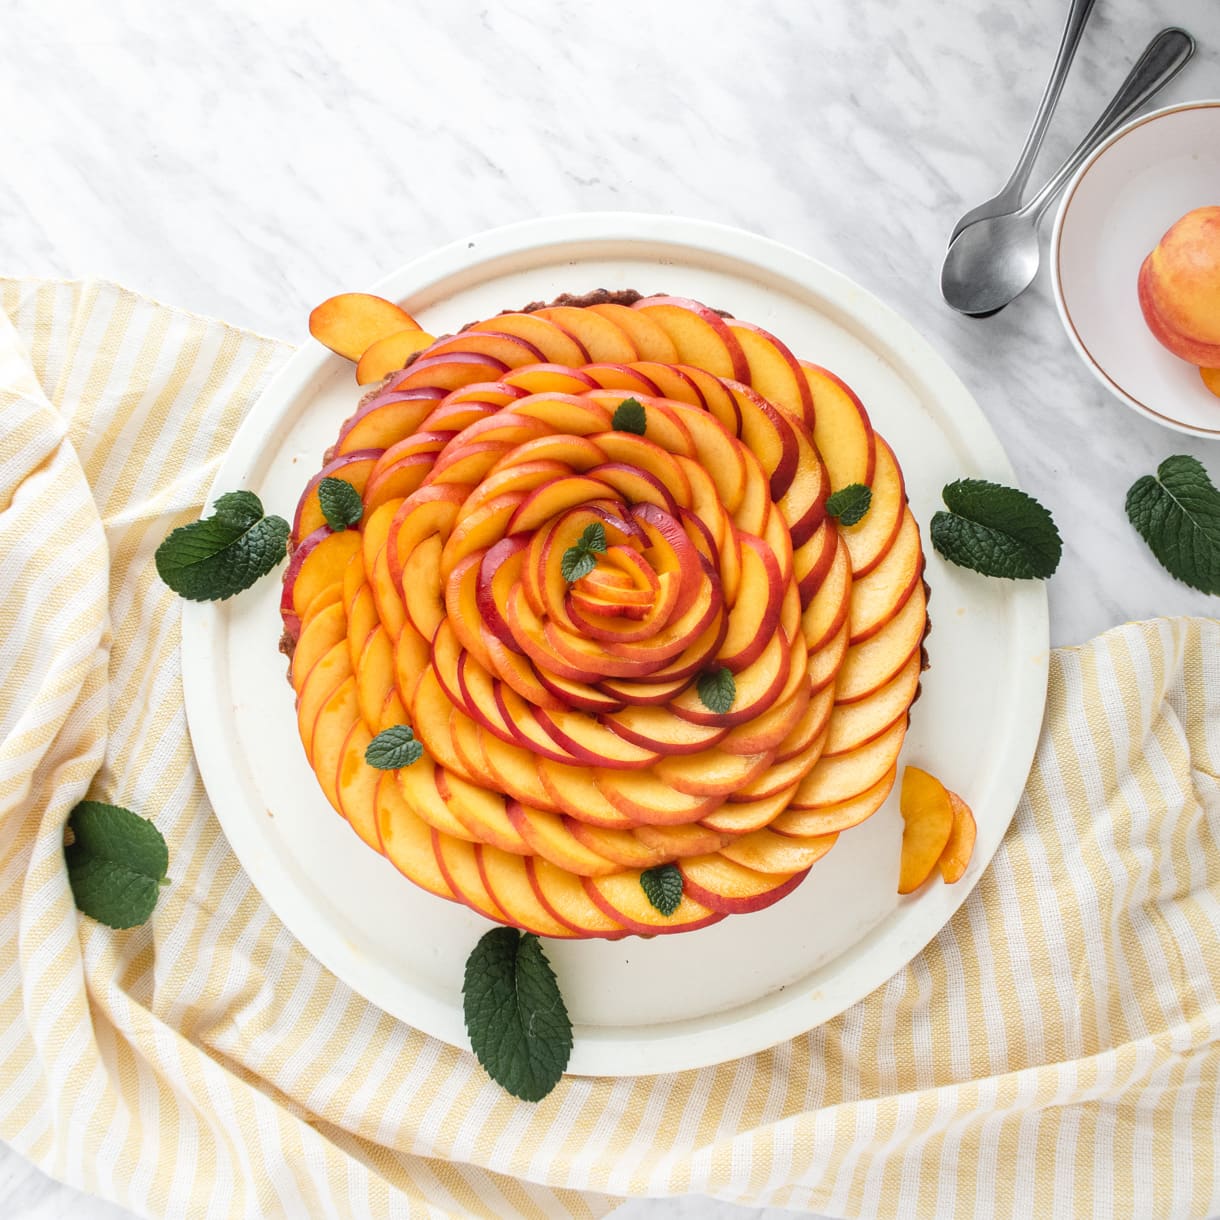 top down view of a vegan tart garnished with nectarines garnished as a rose